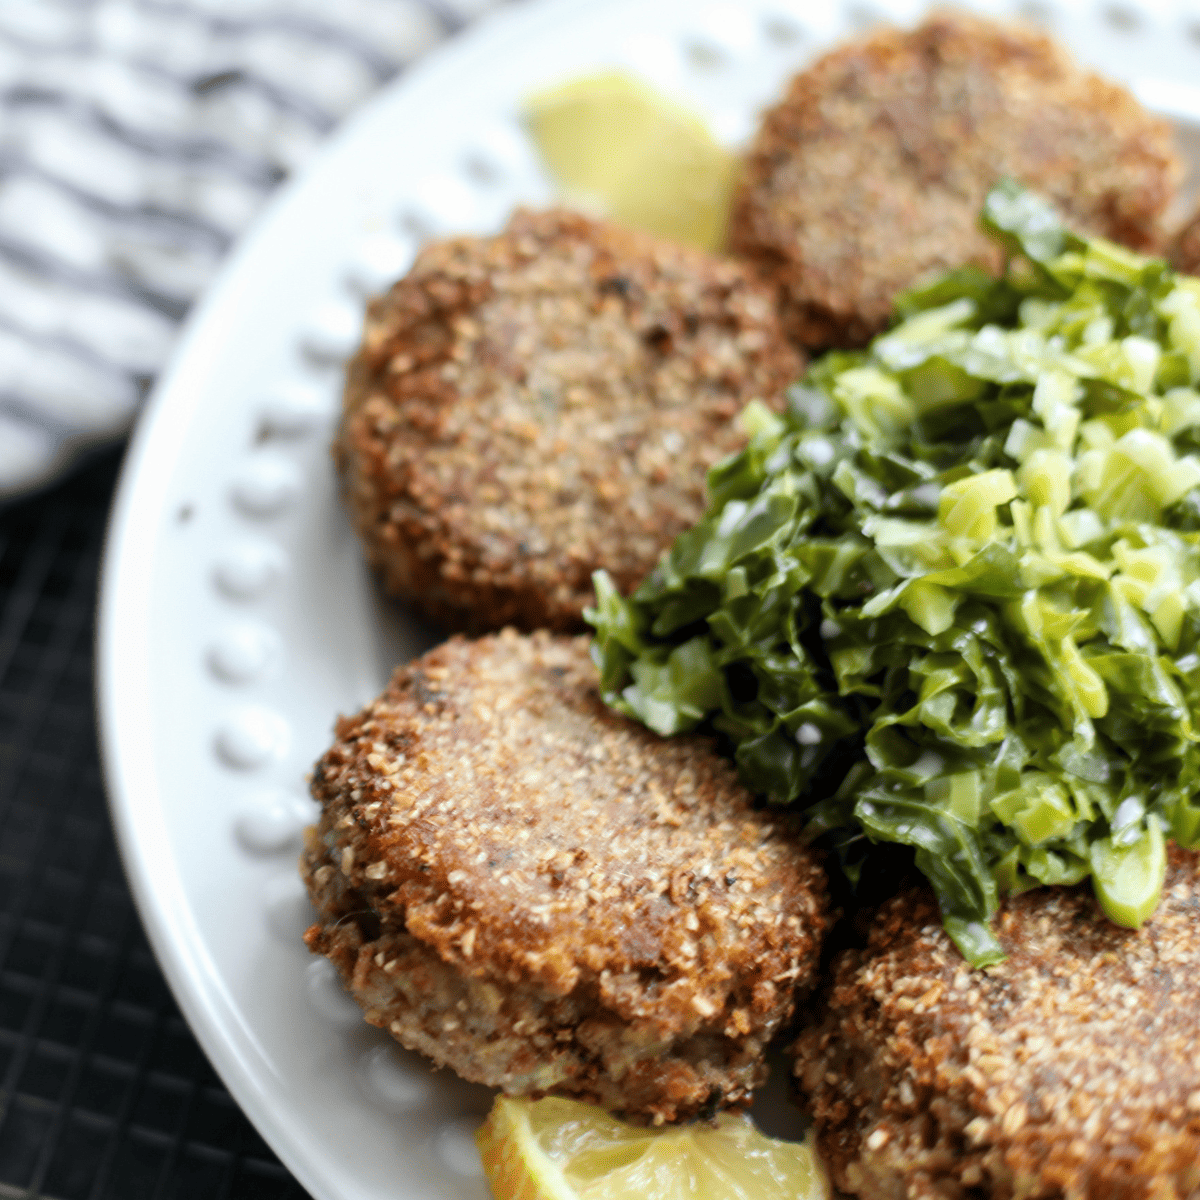 A plate of haggis fritters and shredded cabbage.